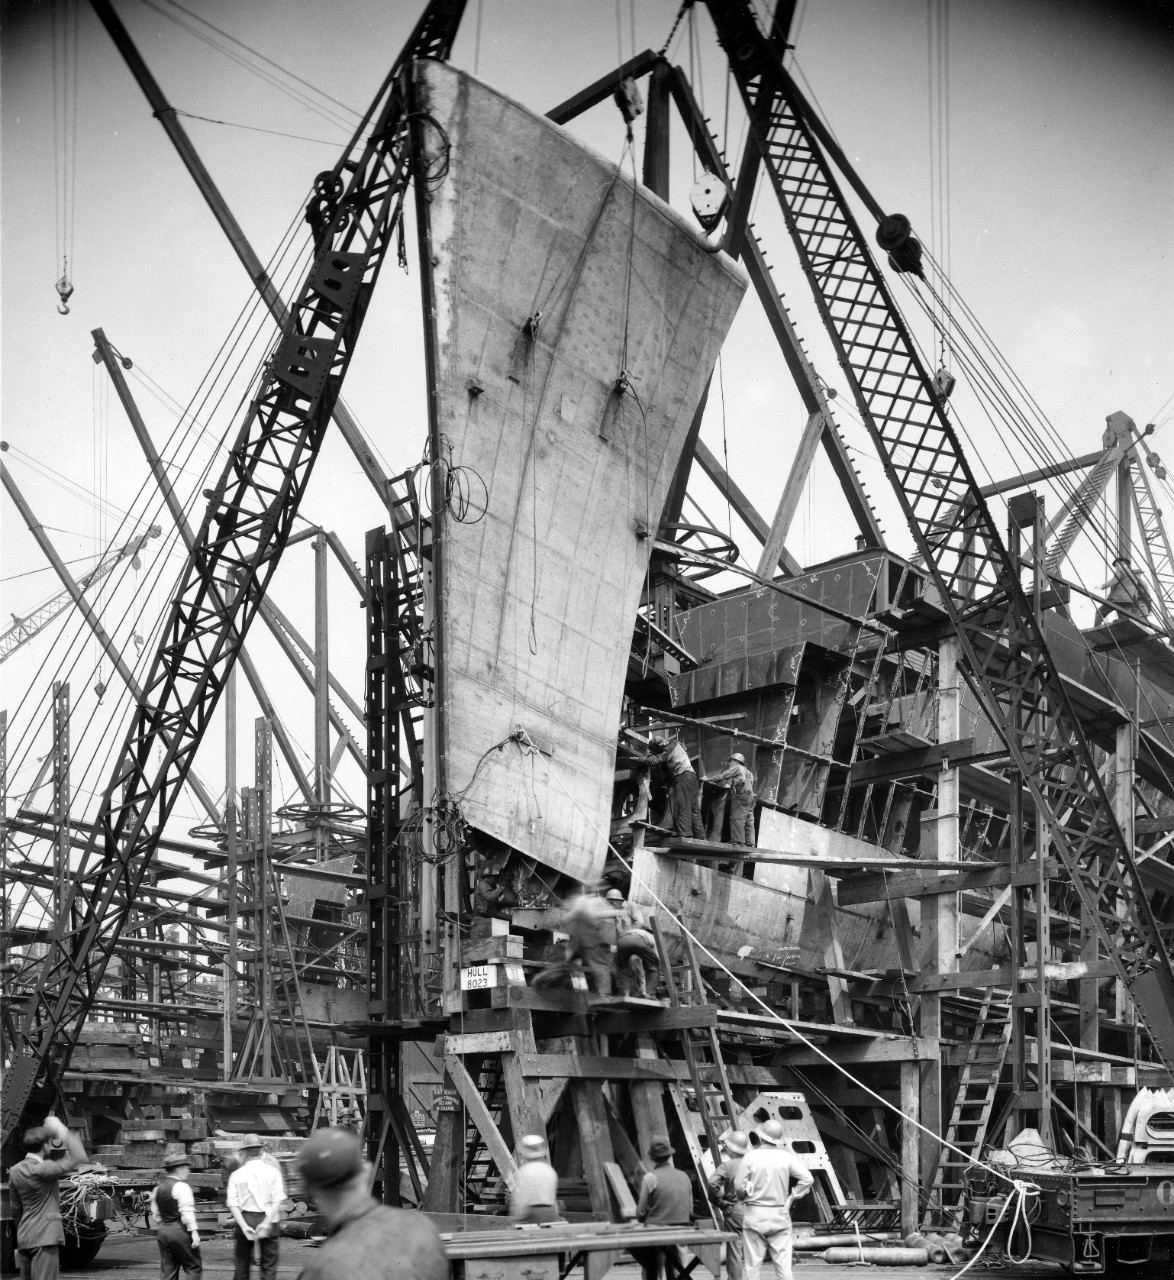 This photograph shows a ship, possibly Frank E. Evans, under construction at Bethlehem Steel’s Staten Island shipyard during World War II. (Naval History and Heritage Command Photograph UA 487.02)